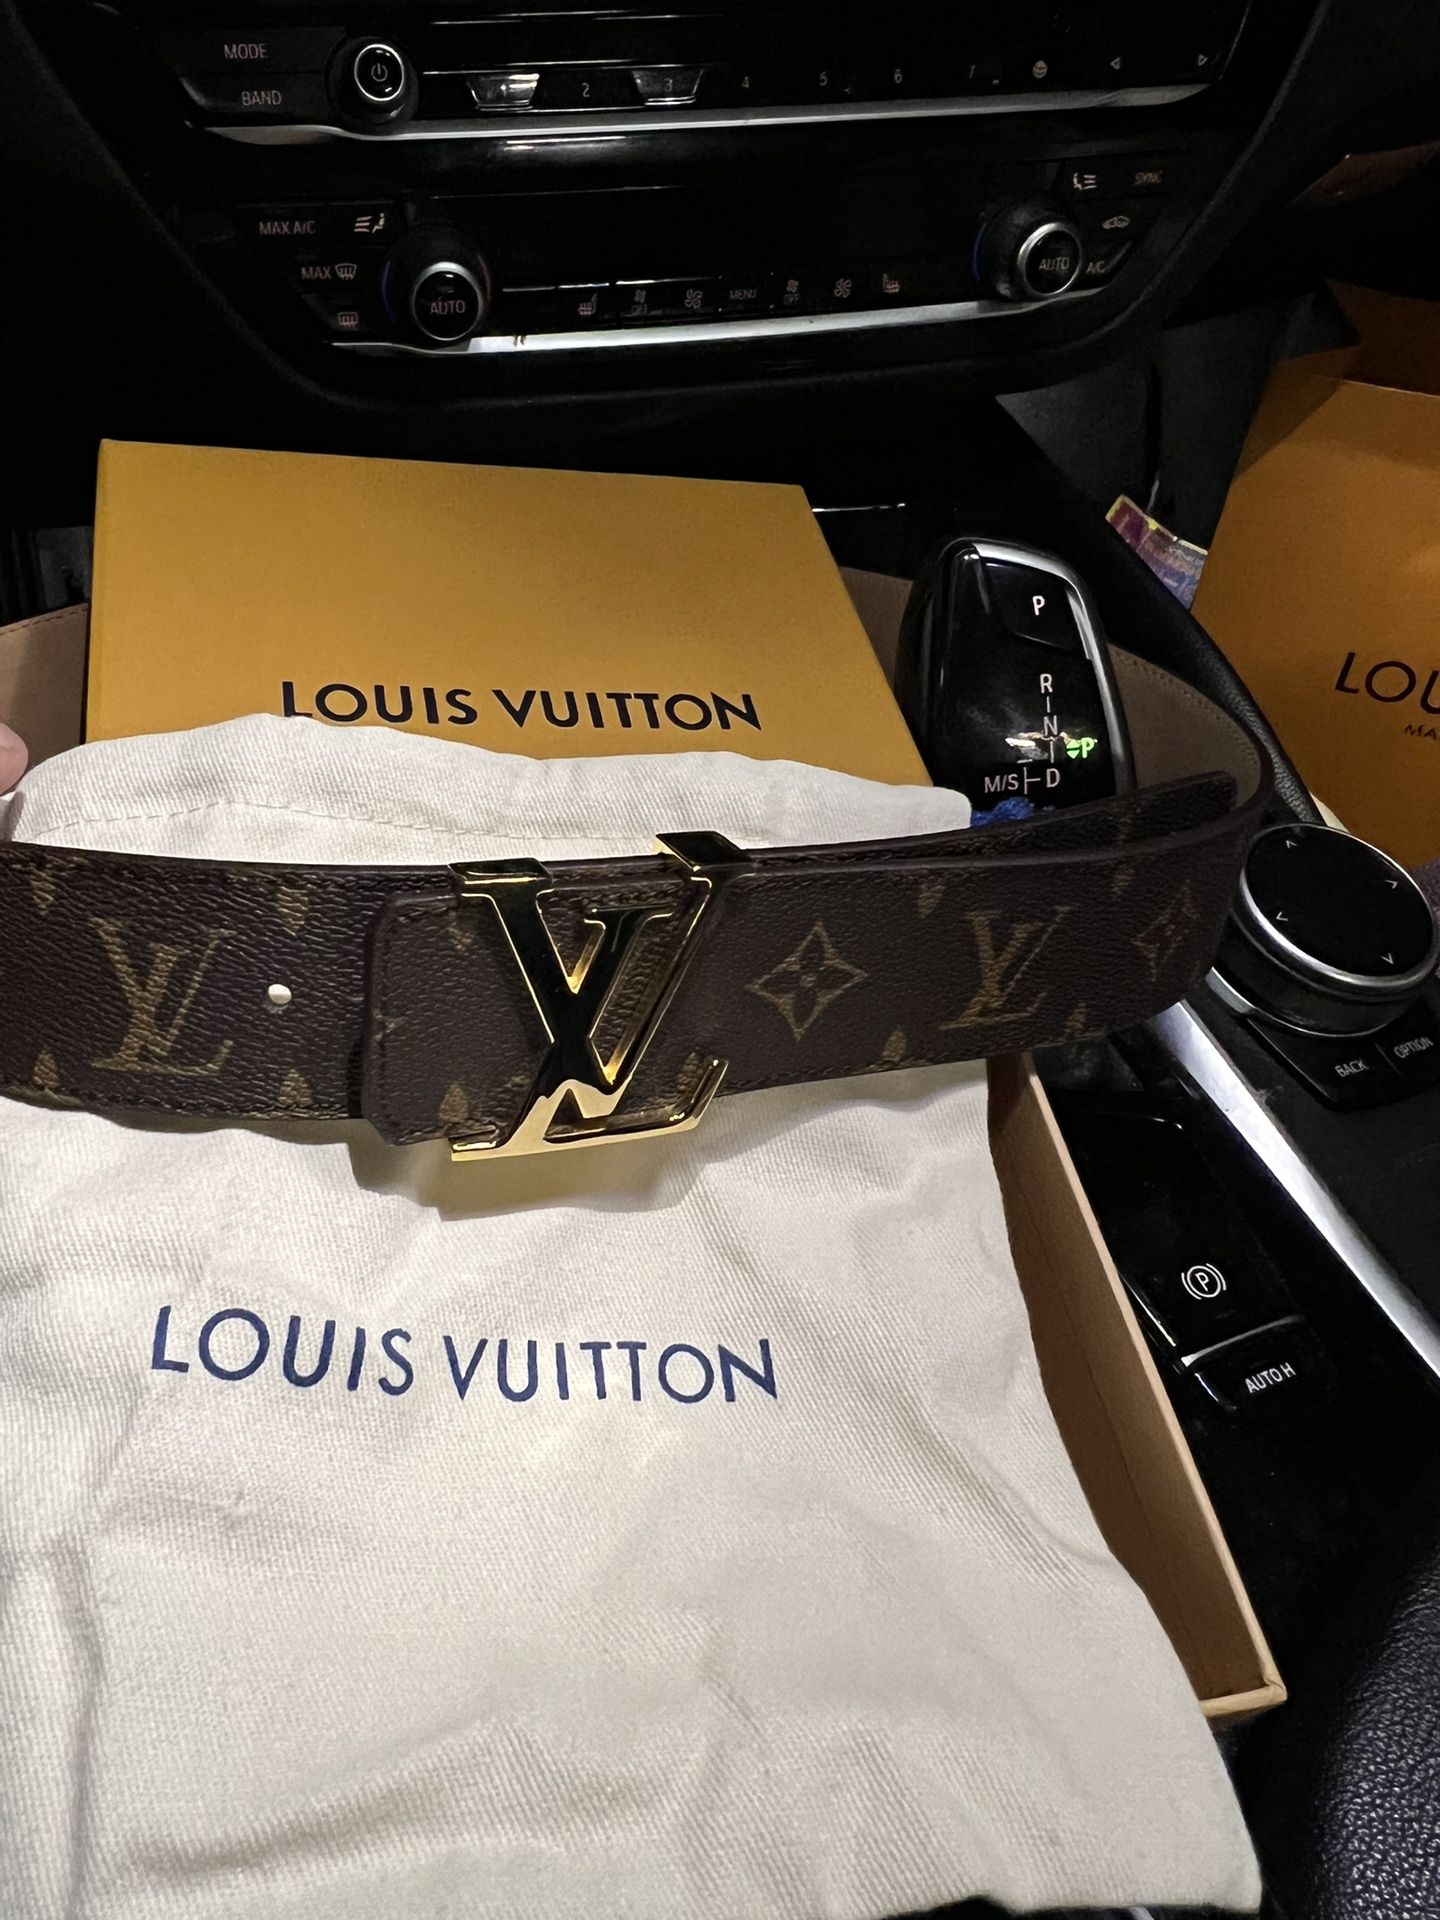 Authentic LV Louis Vuitton INITIALES 30MM REVERSIBLE BELT brown and red  size 75cm (30 in) for Sale in Jupiter, FL - OfferUp